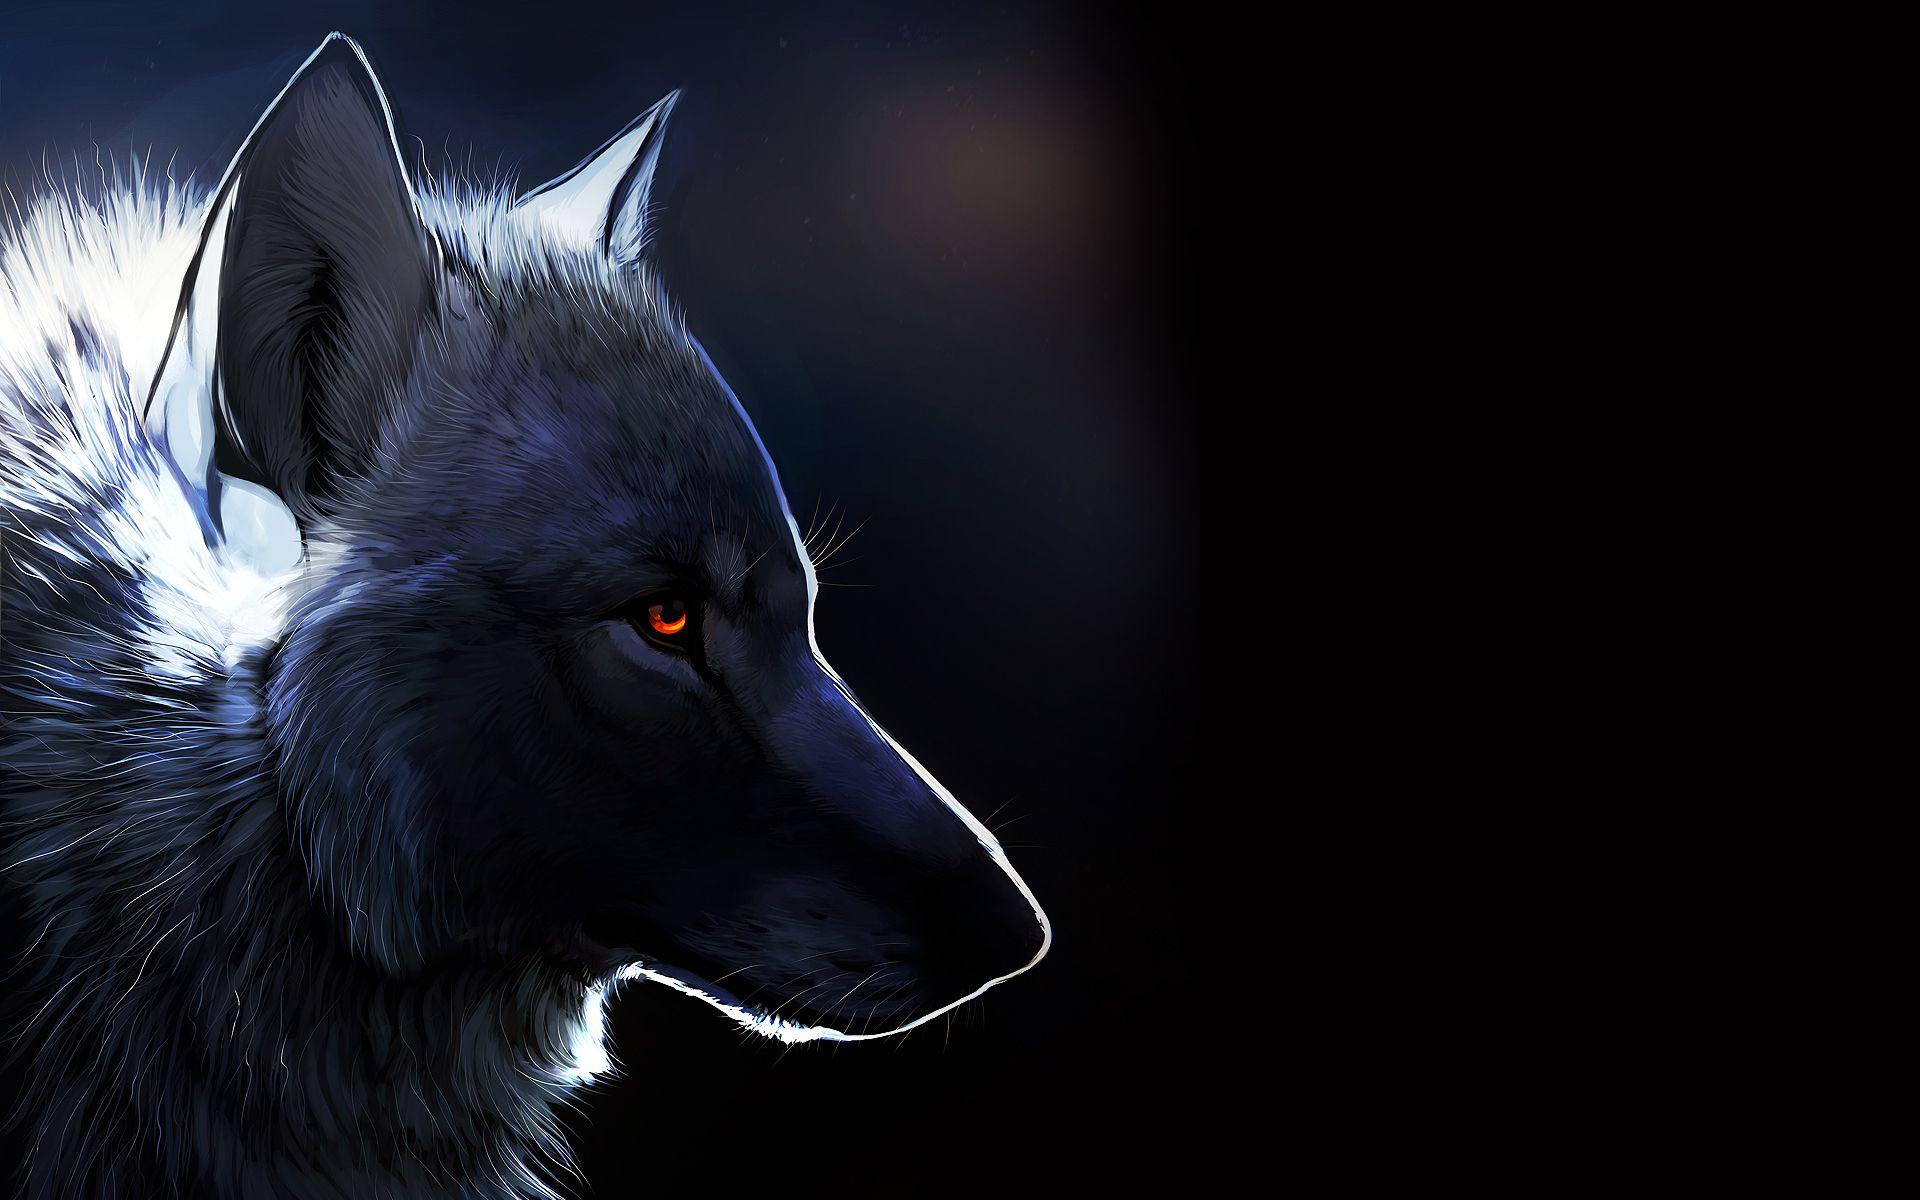 Wolf with glowing eyes wallpaper and image, picture